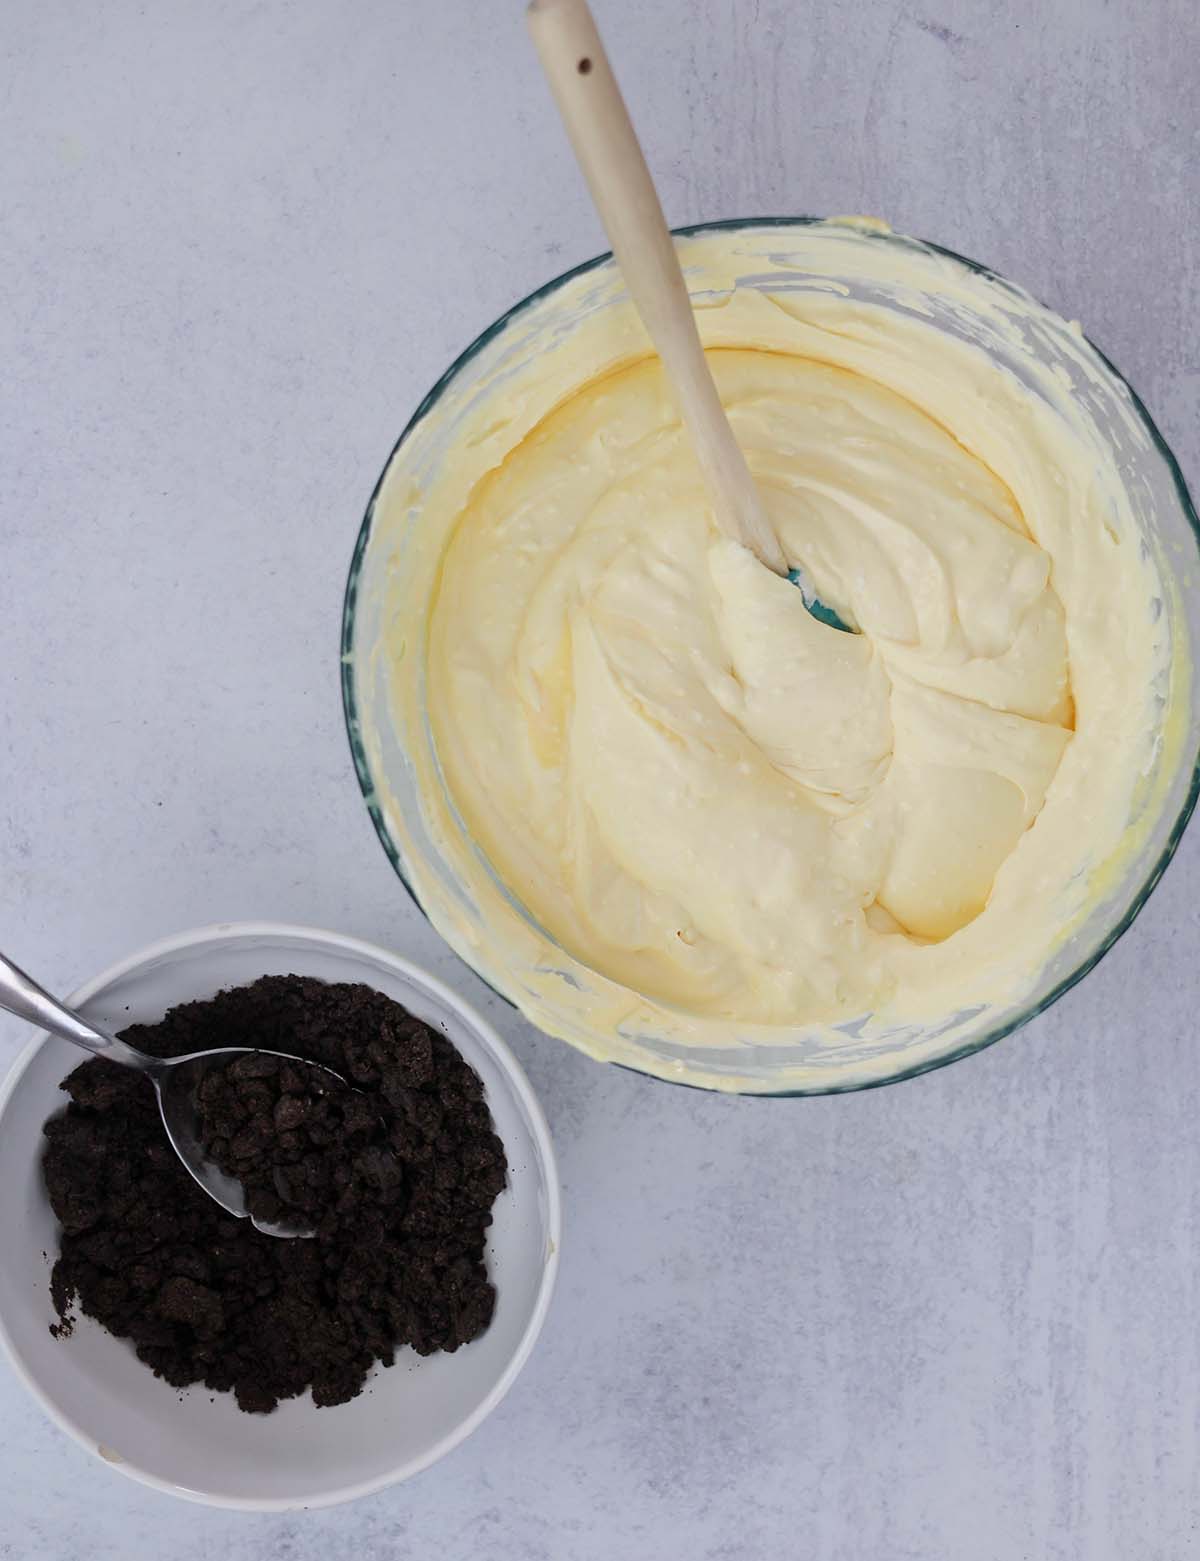 pudding mixture in a bowl with a spoon and crushed Oreo cookies in a separate bowl with a spoon.